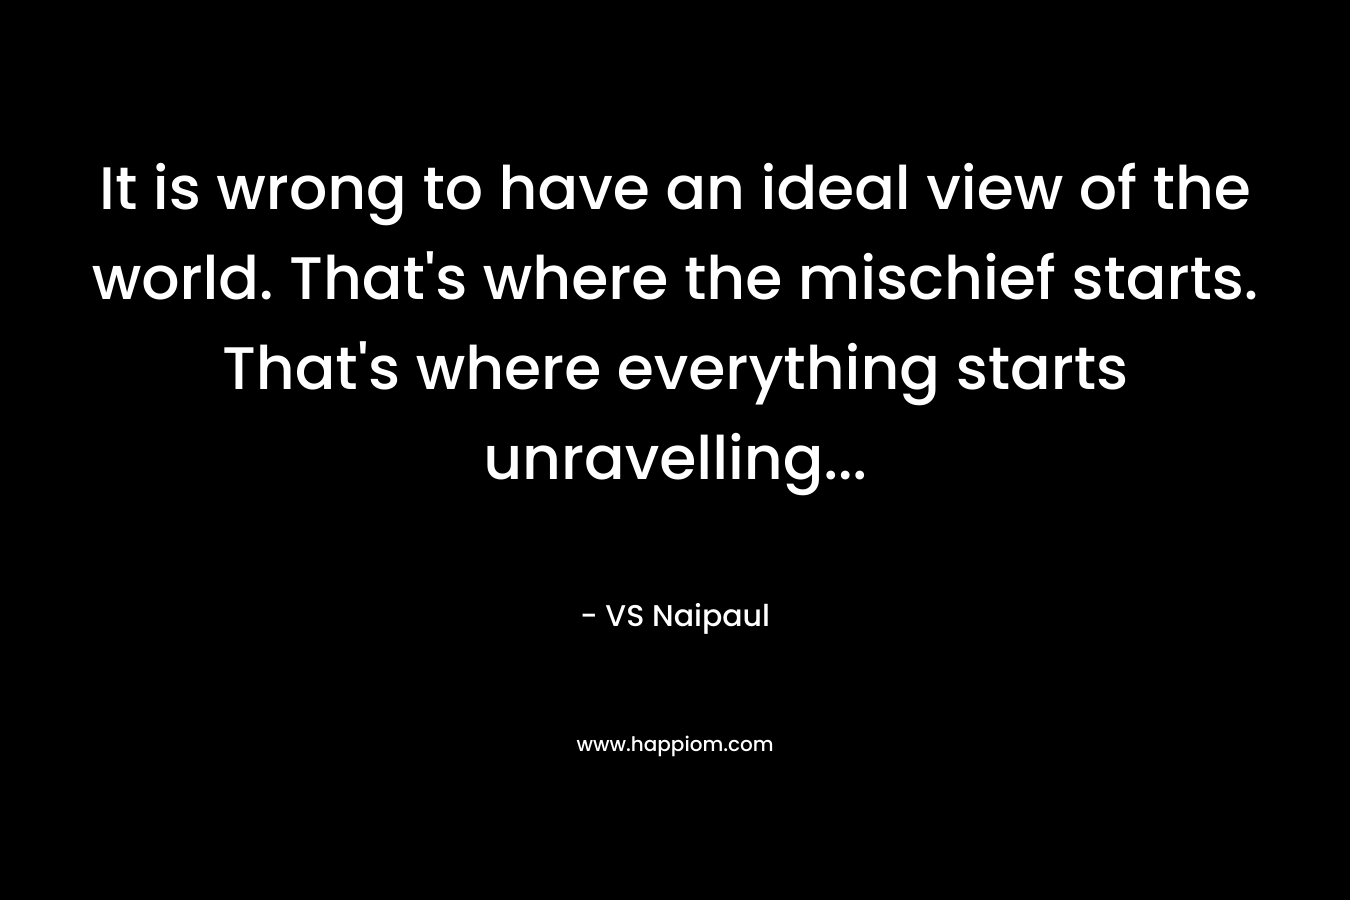 It is wrong to have an ideal view of the world. That's where the mischief starts. That's where everything starts unravelling...